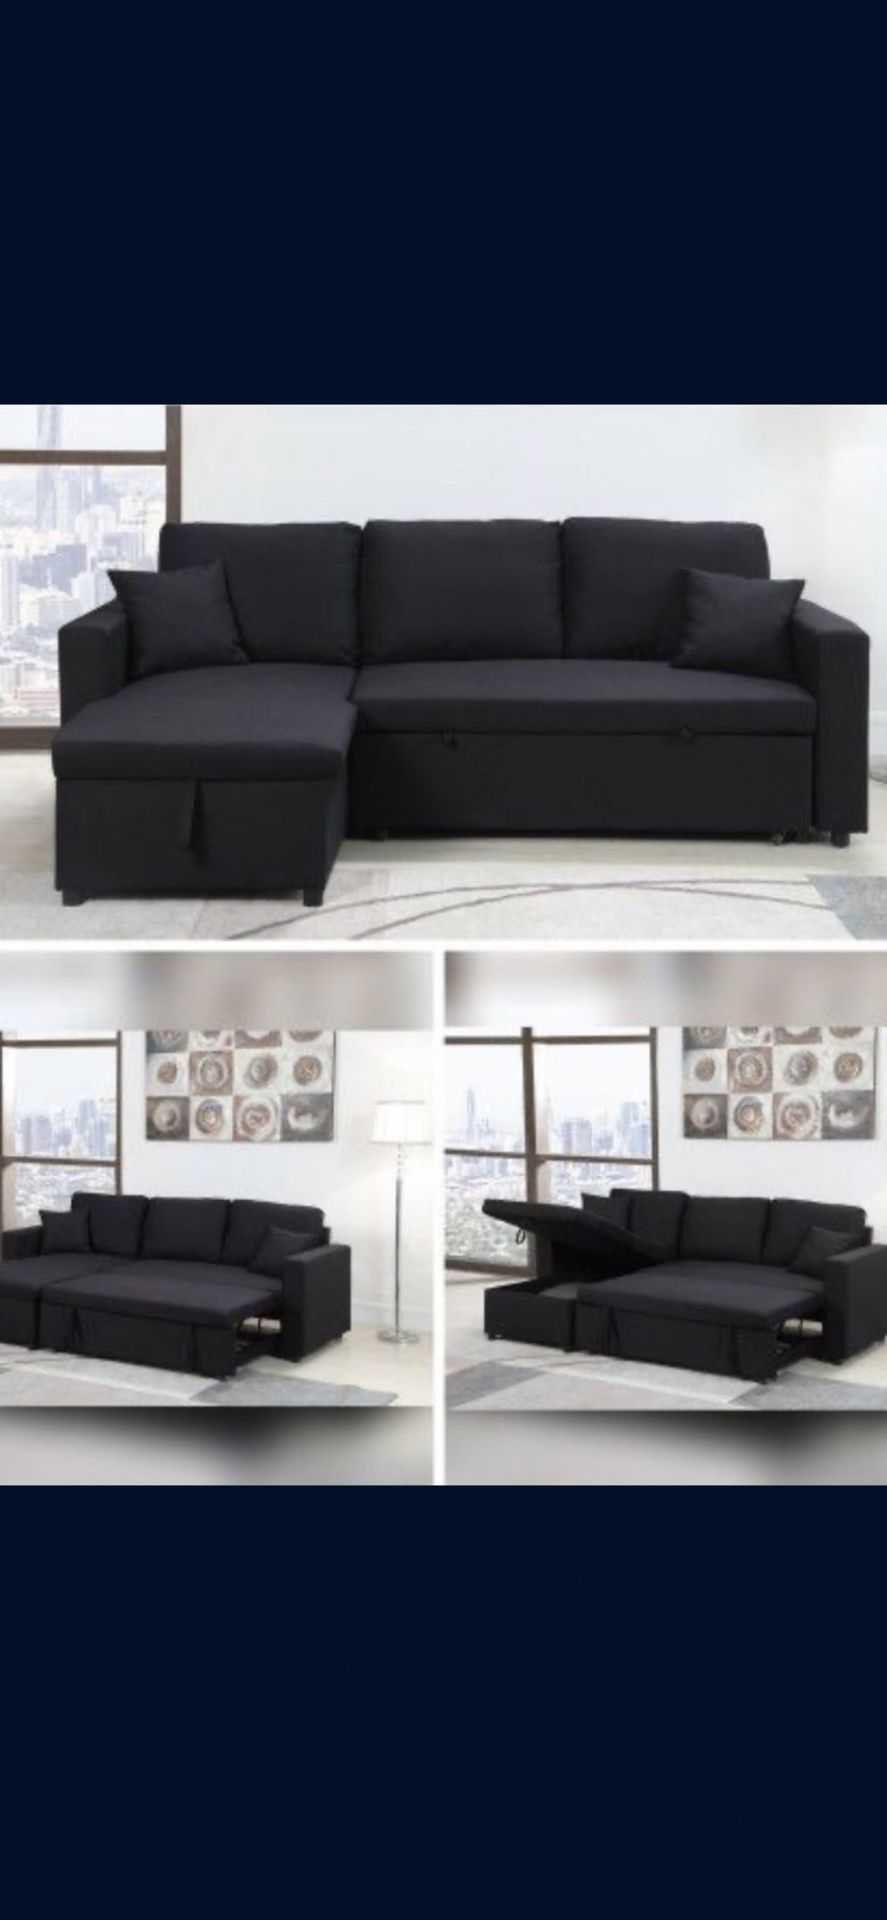 $360 Sofa With Pull Out Bed Storage Below 87x57